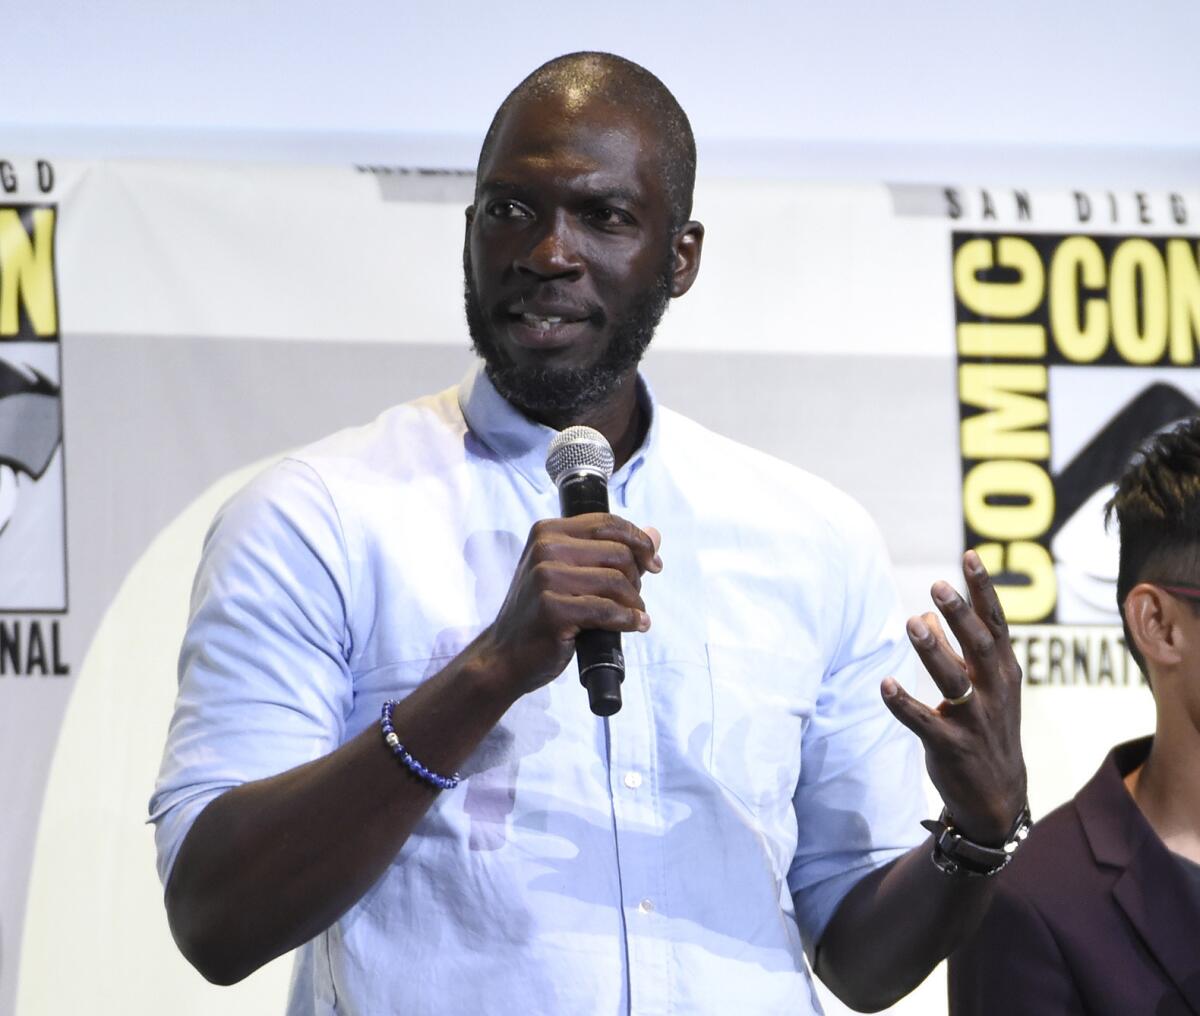 Director Rick Famuyiwa speaks during the "Justice League" panel at Comic-Con International in San Diego on July 23.